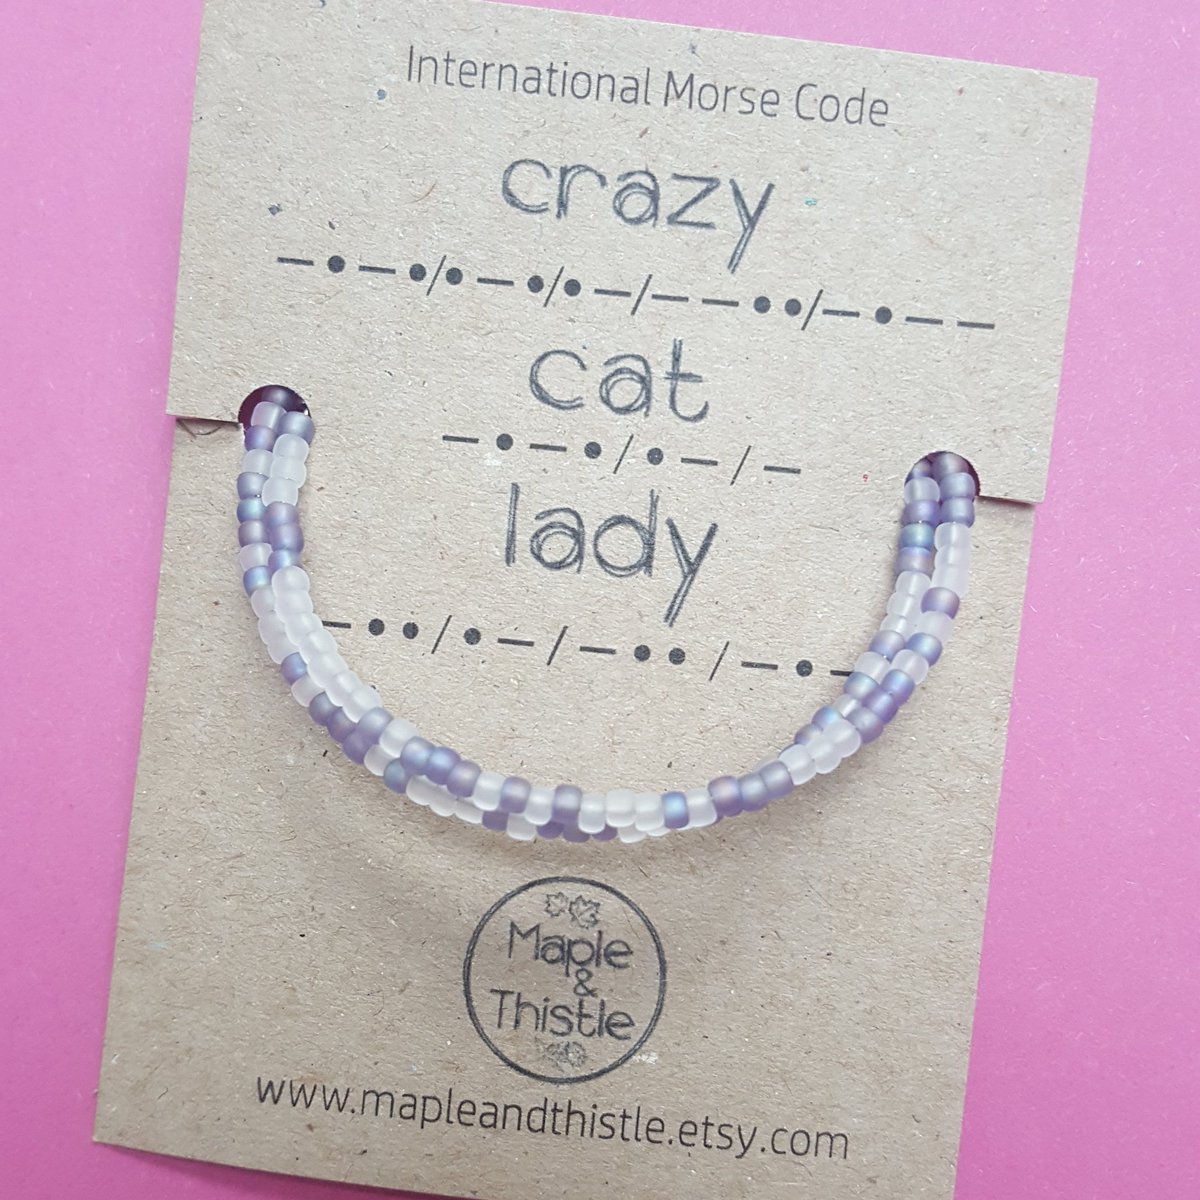 #Crazycatlady back in stock! Really pretty beads as well. Available to buy from my #Etsy shop mapleandthistle.etsy.com

#Morsecodebracelet #Catlover #Catlady #Meorywirebracelet #Wrapbracelet #Catowner #Lovecats #catsareawesome #catsrule #mapleandthistle  etsy.me/2RkCIDA